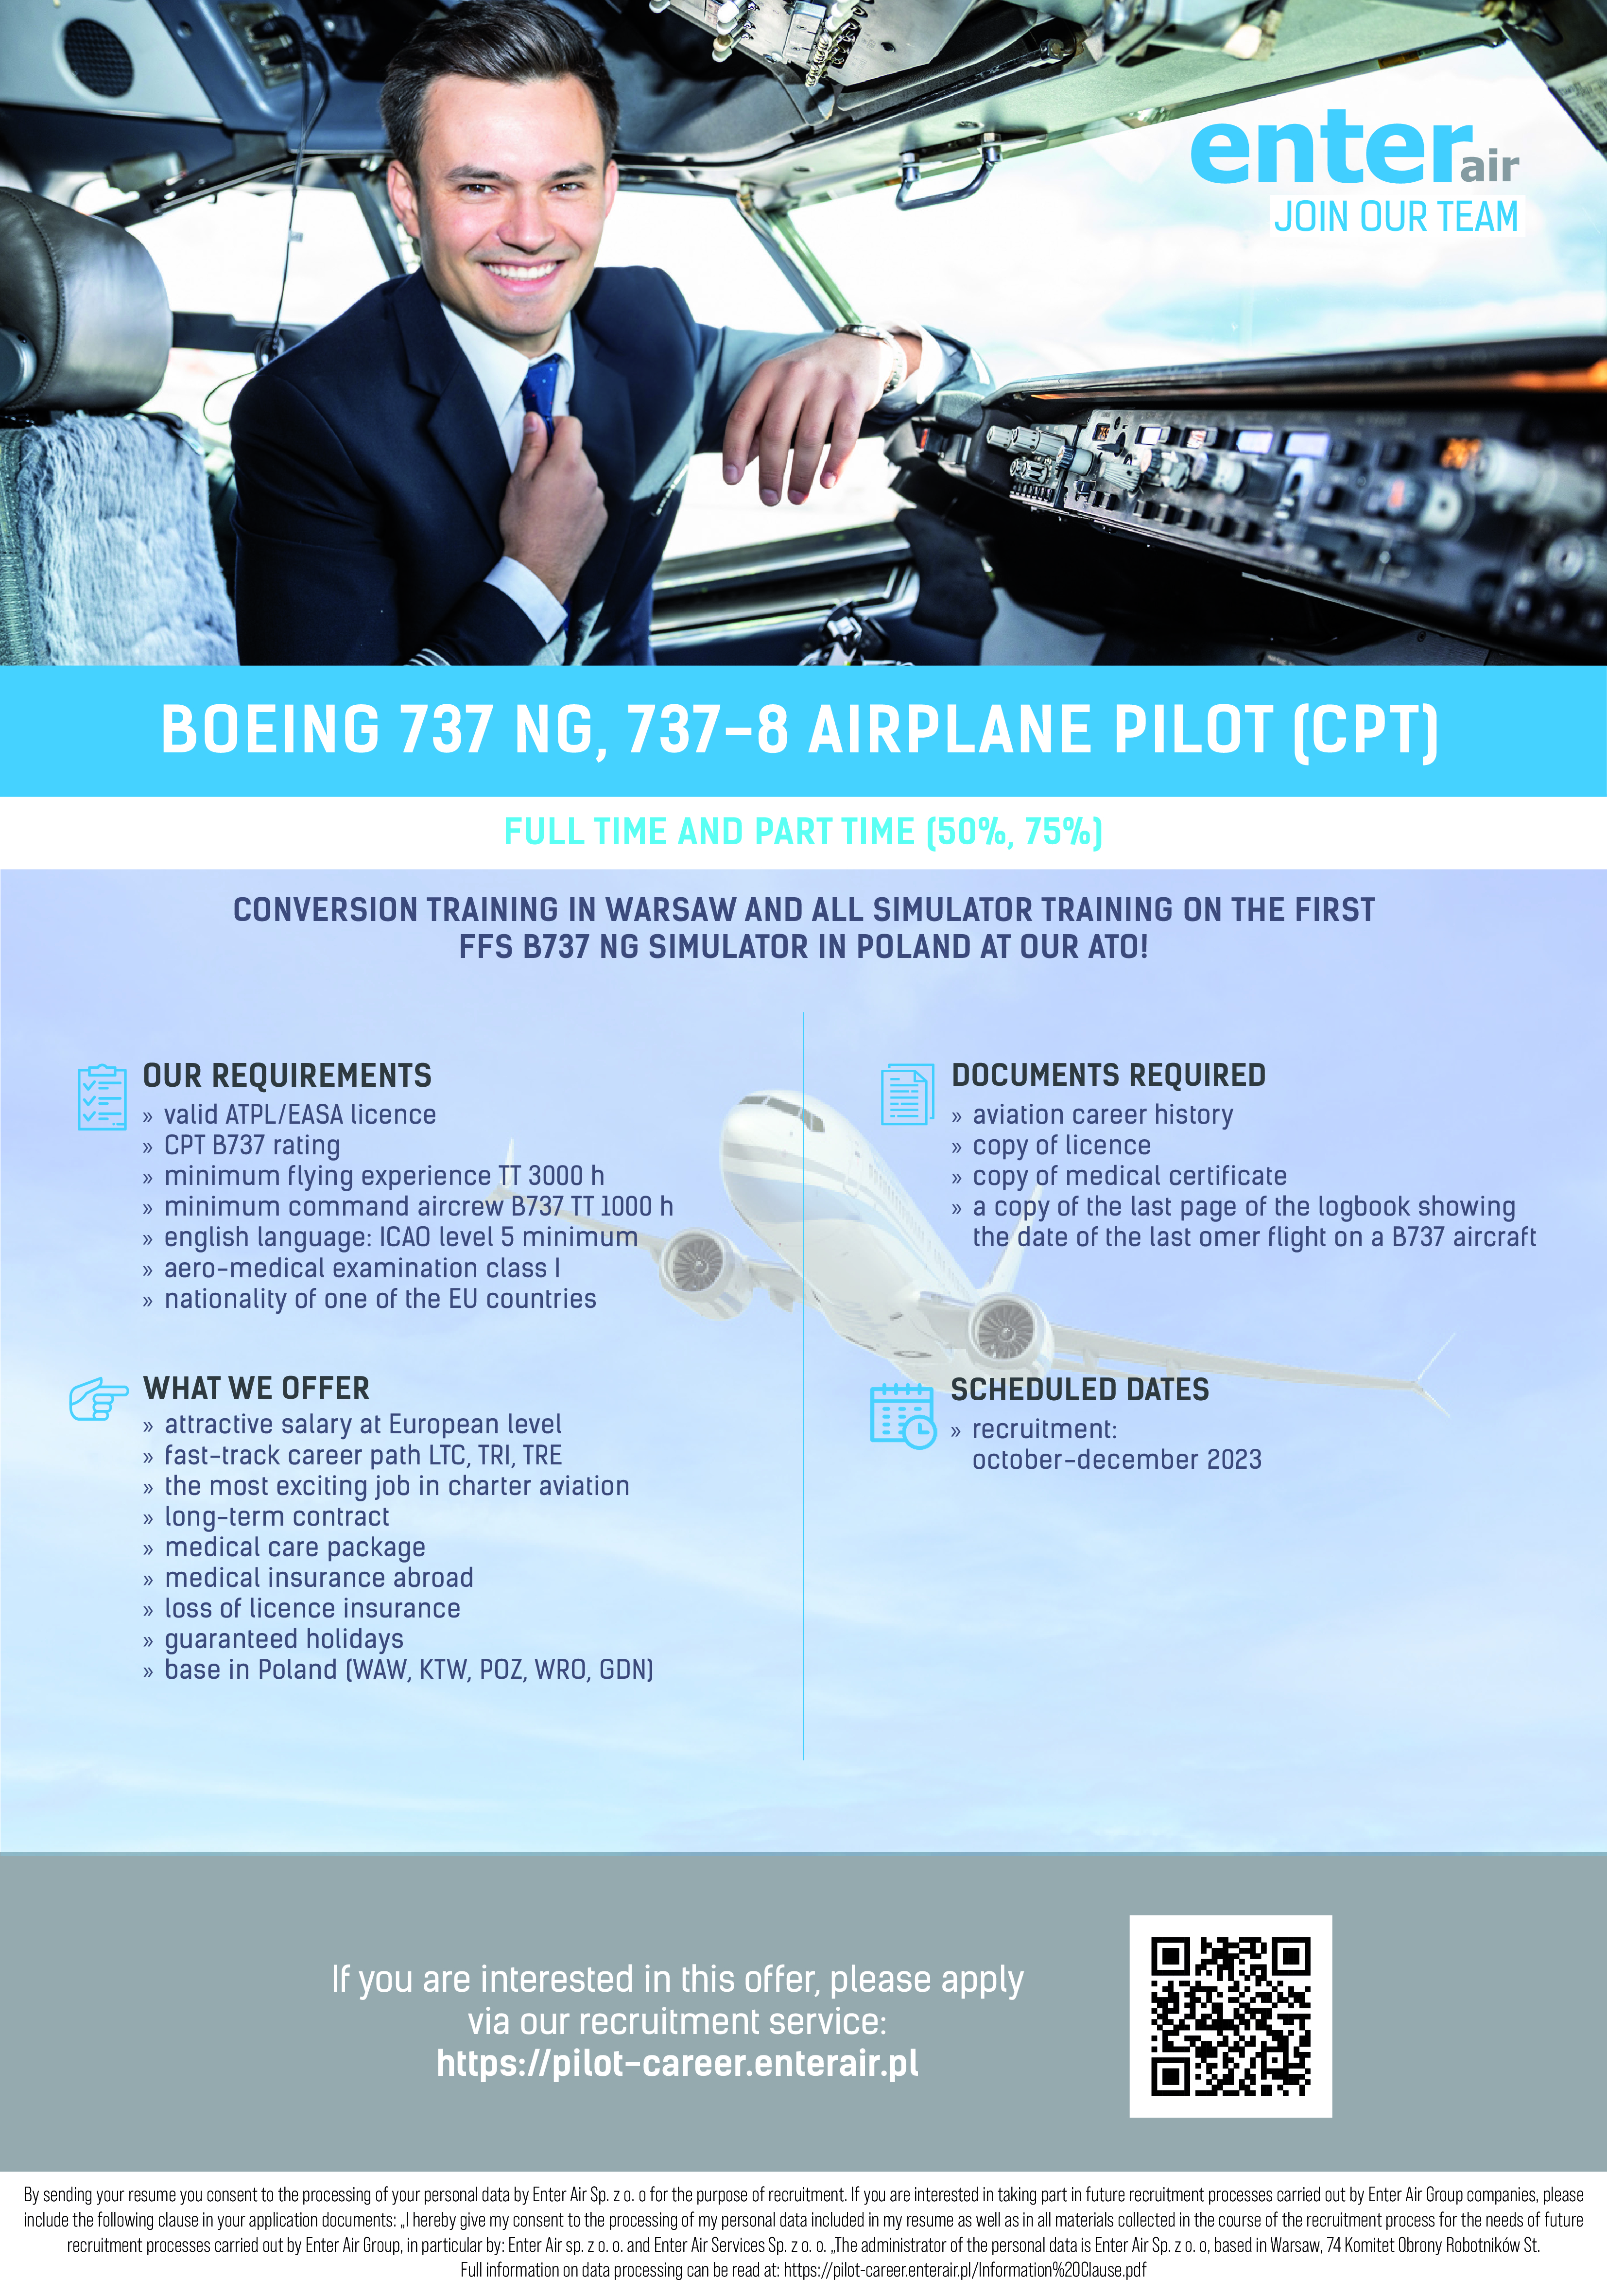 Boeing 737 NG, 737-8 Airplane Pilot (CPT)